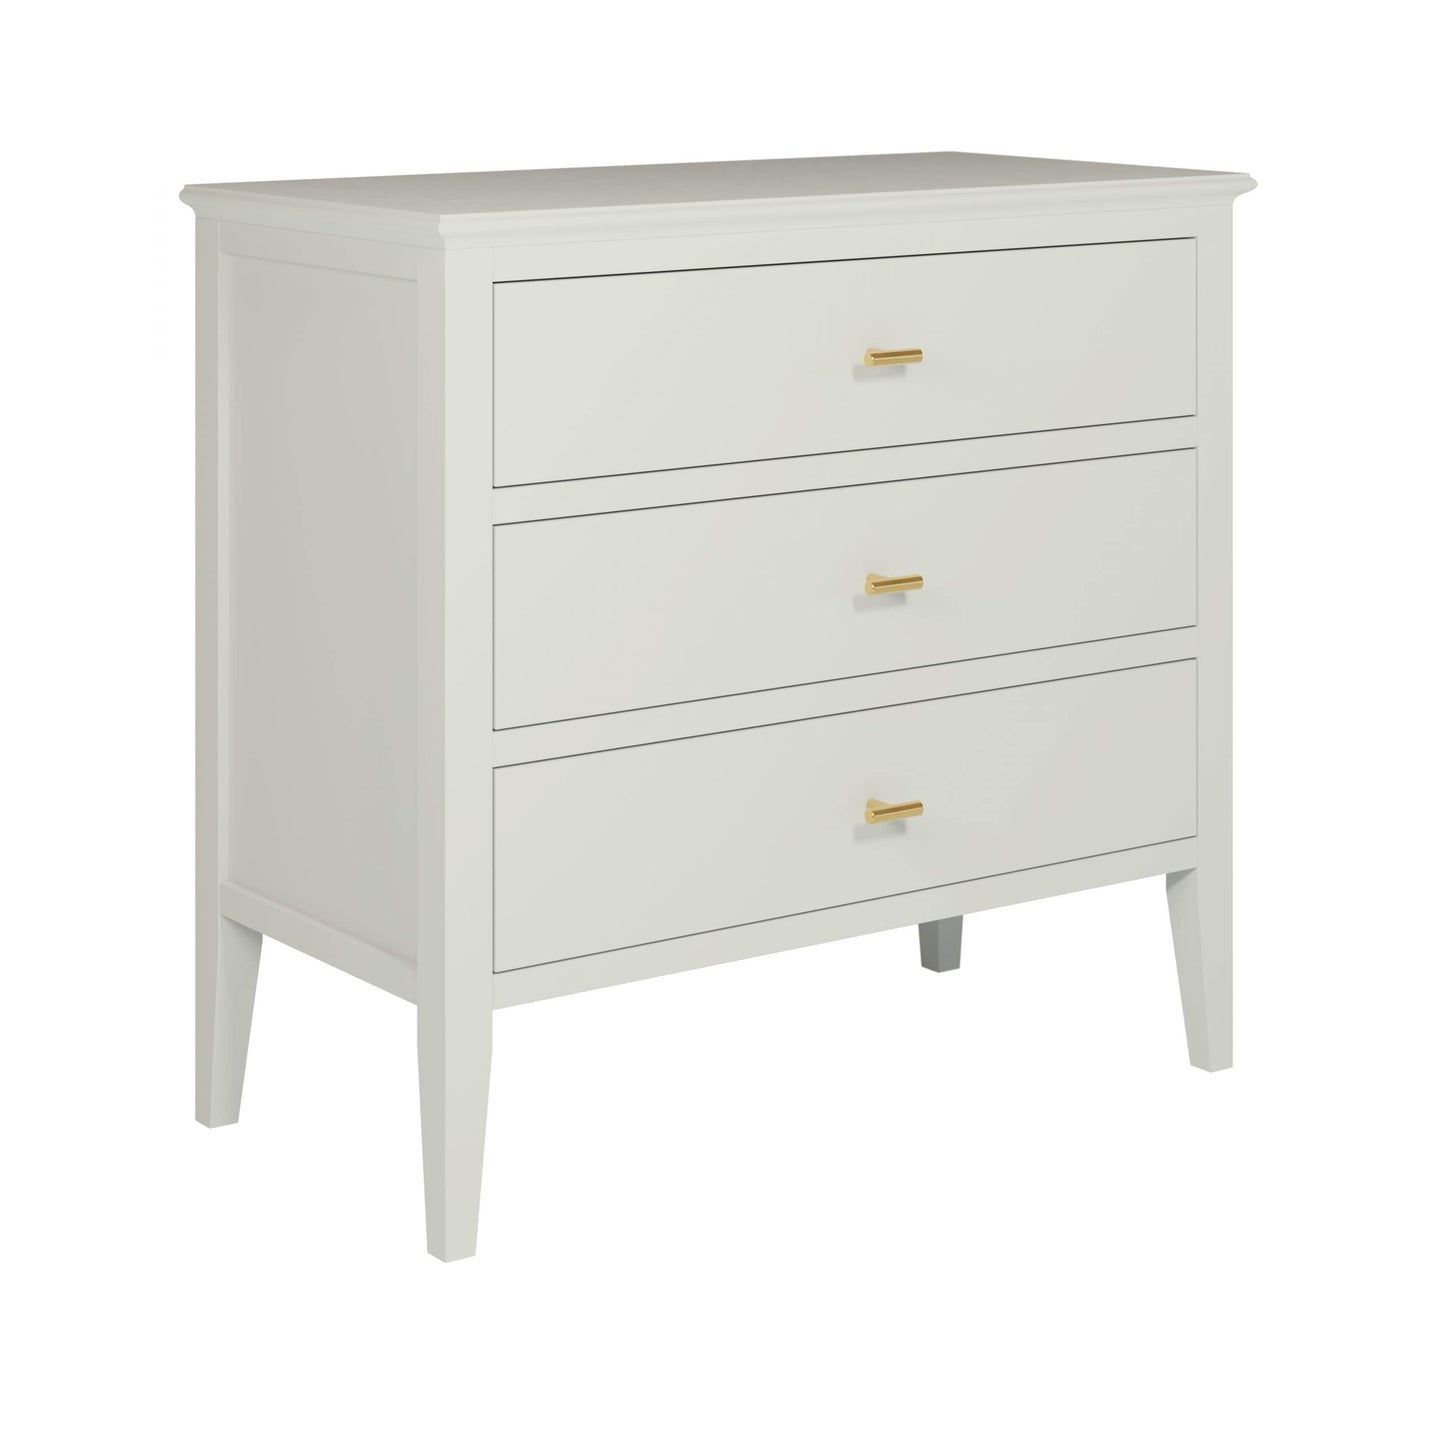 Grey Chilworth Chest of Drawers